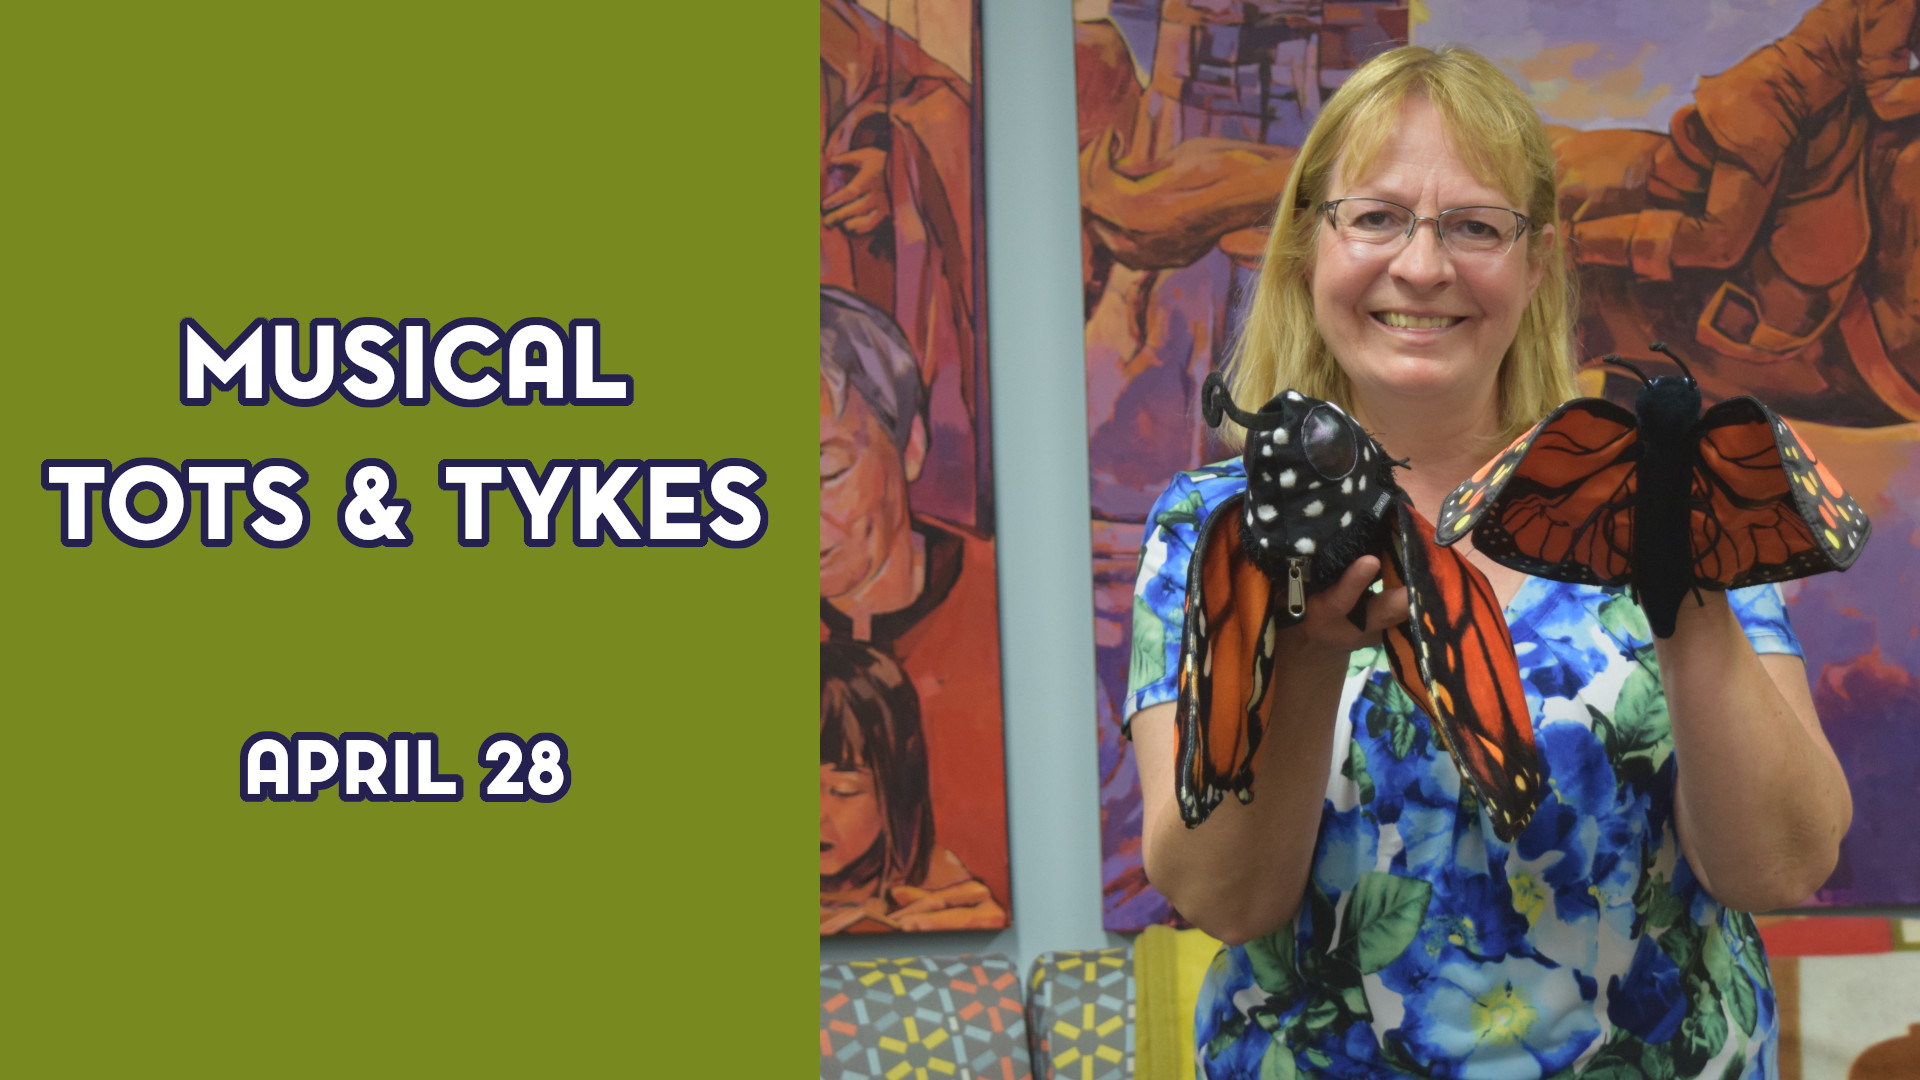 A woman holds butterly puppets next to the text "Musical Tots & Tykes April 28"